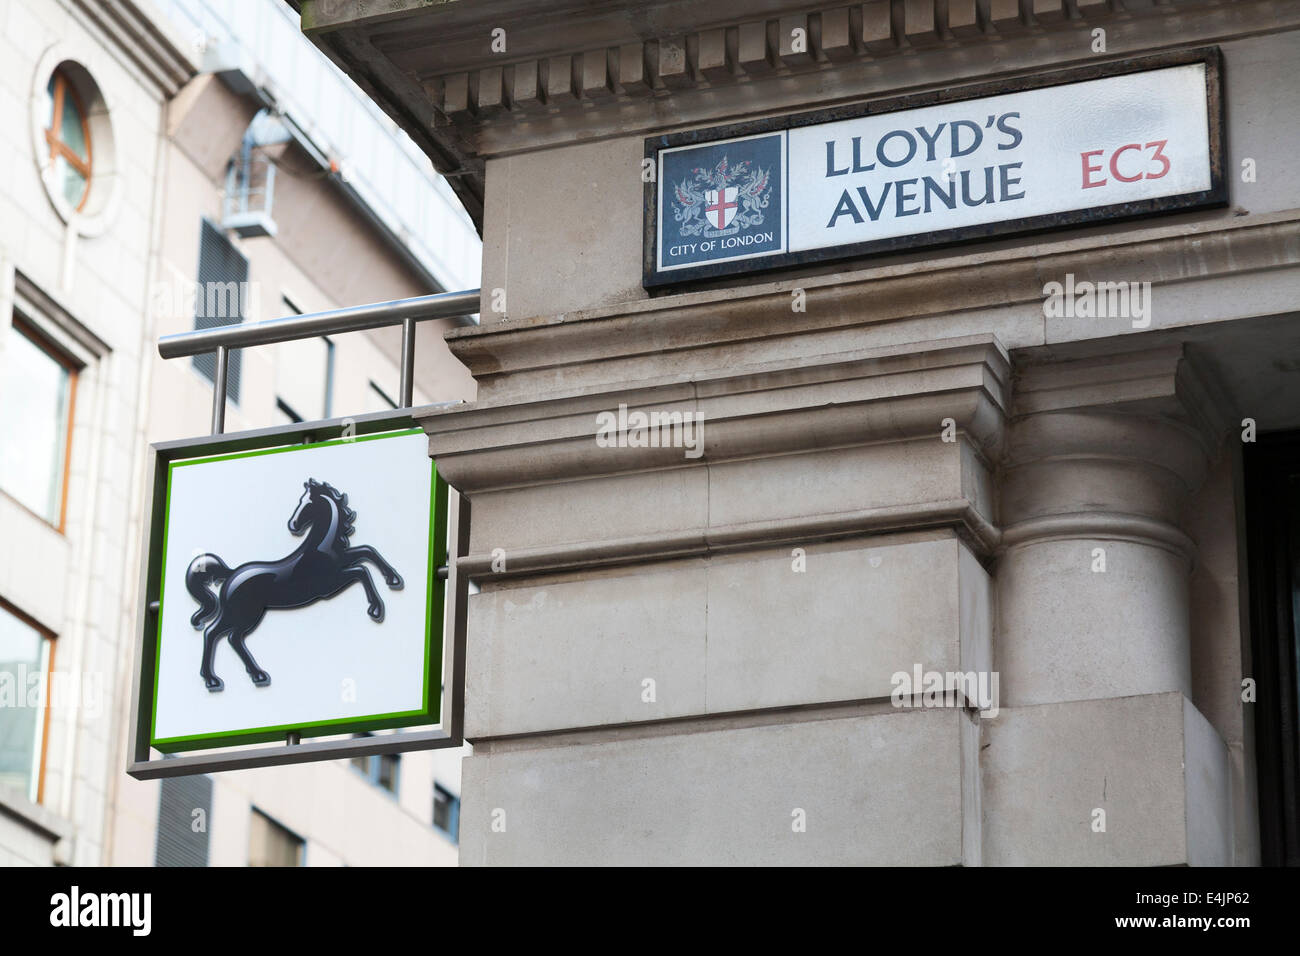 Lloyds / Lloyd's bank sign / logo at their branch on the corner of Lloyd's Avenue and Fenchurch street in the city of London. UK Stock Photo